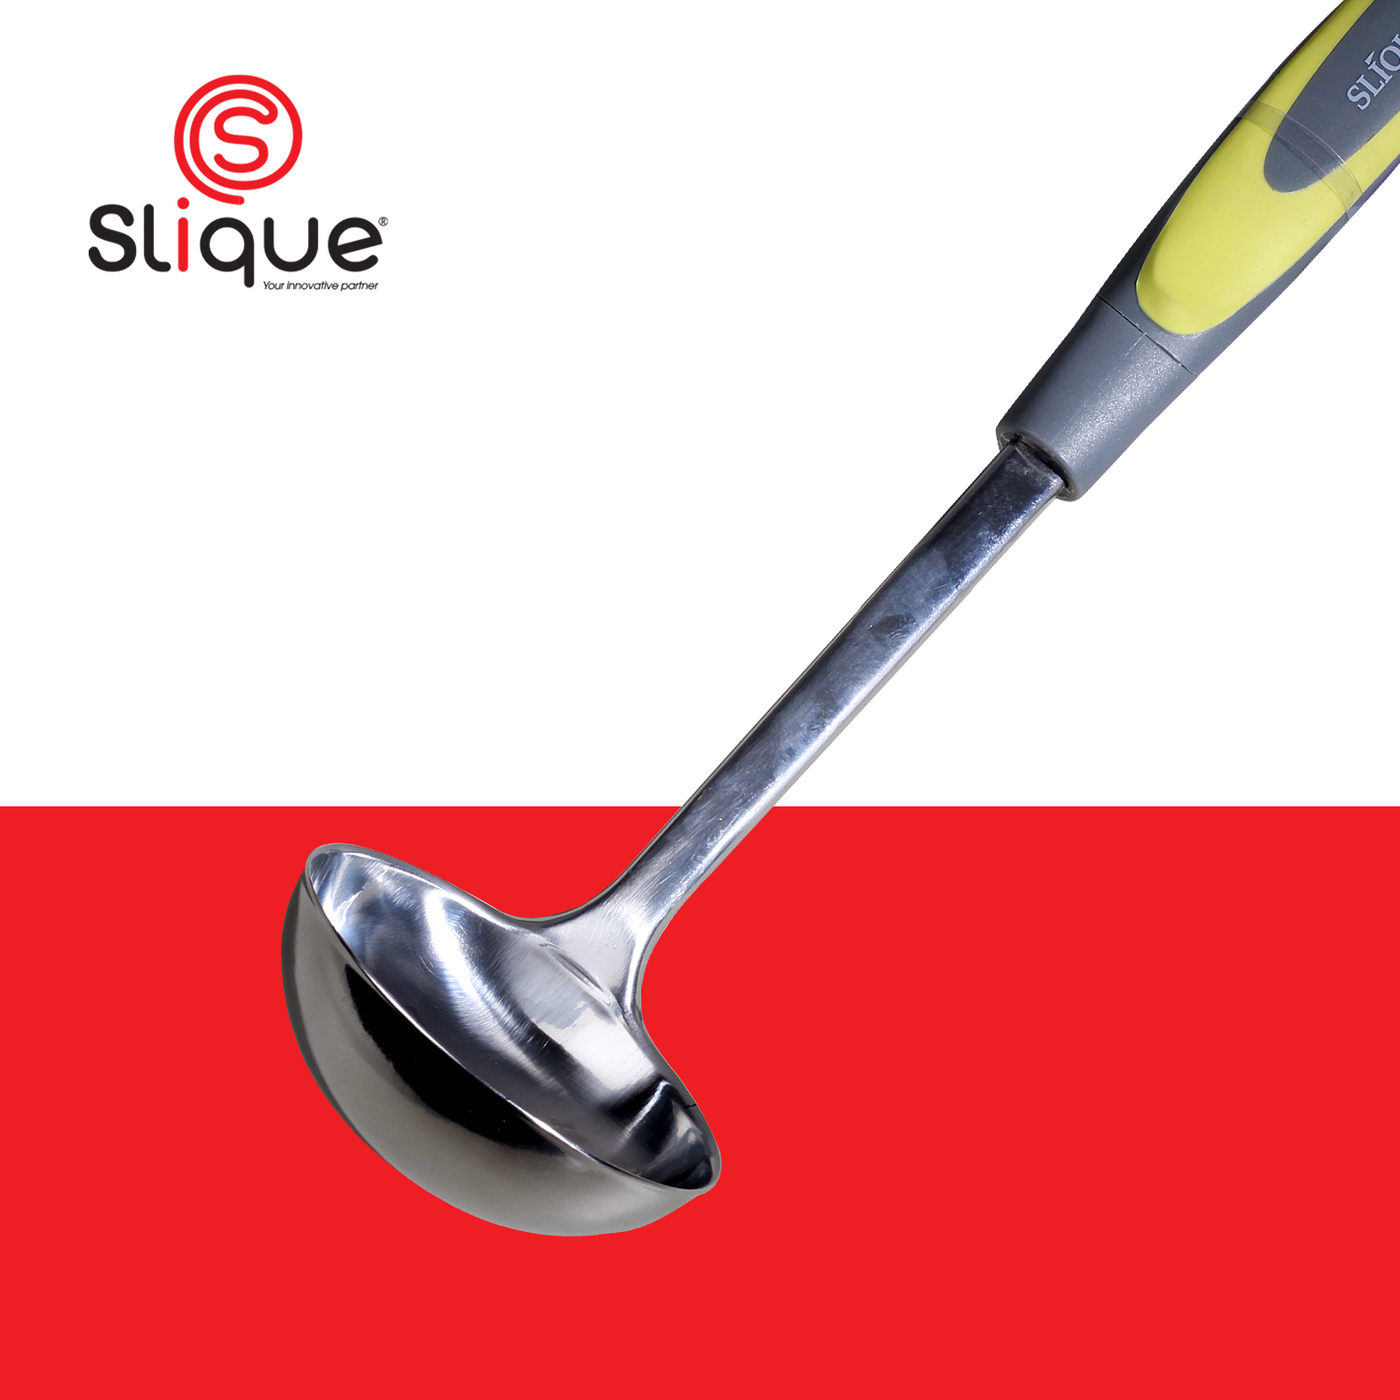 SLIQUE Premium 18/8 Stainless Steel Ladle TPR Silicone Handle Kitchen Essentials Amazing Gift Idea For Any Occasion! (Green)